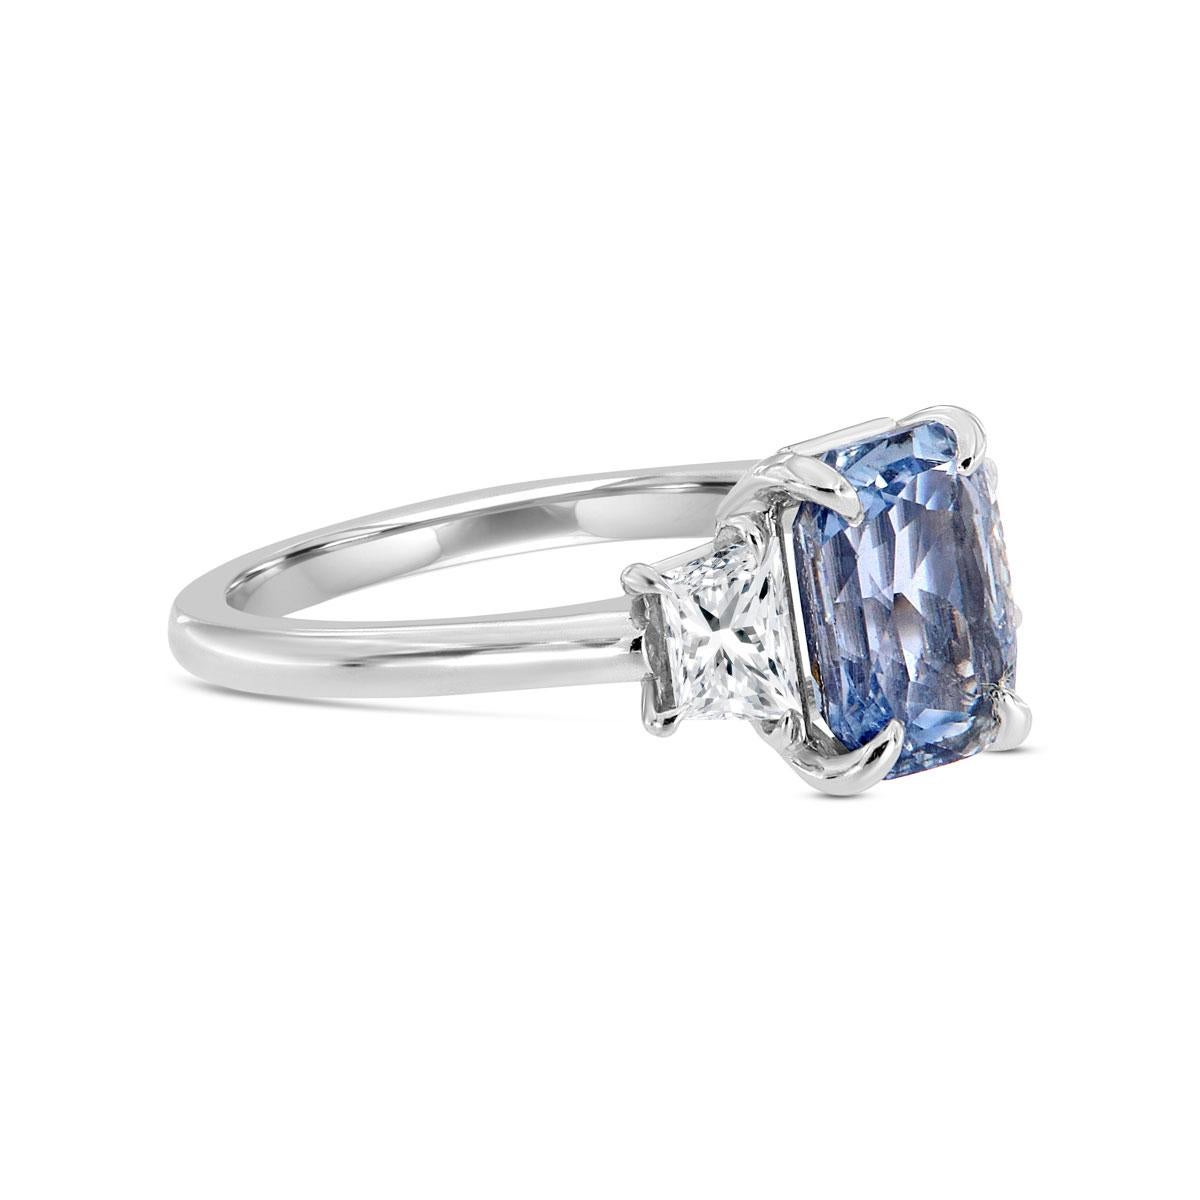 
This Timeless 18K White Gold Three-stone ring features a One-Of-A-Kind 2.42-carat 